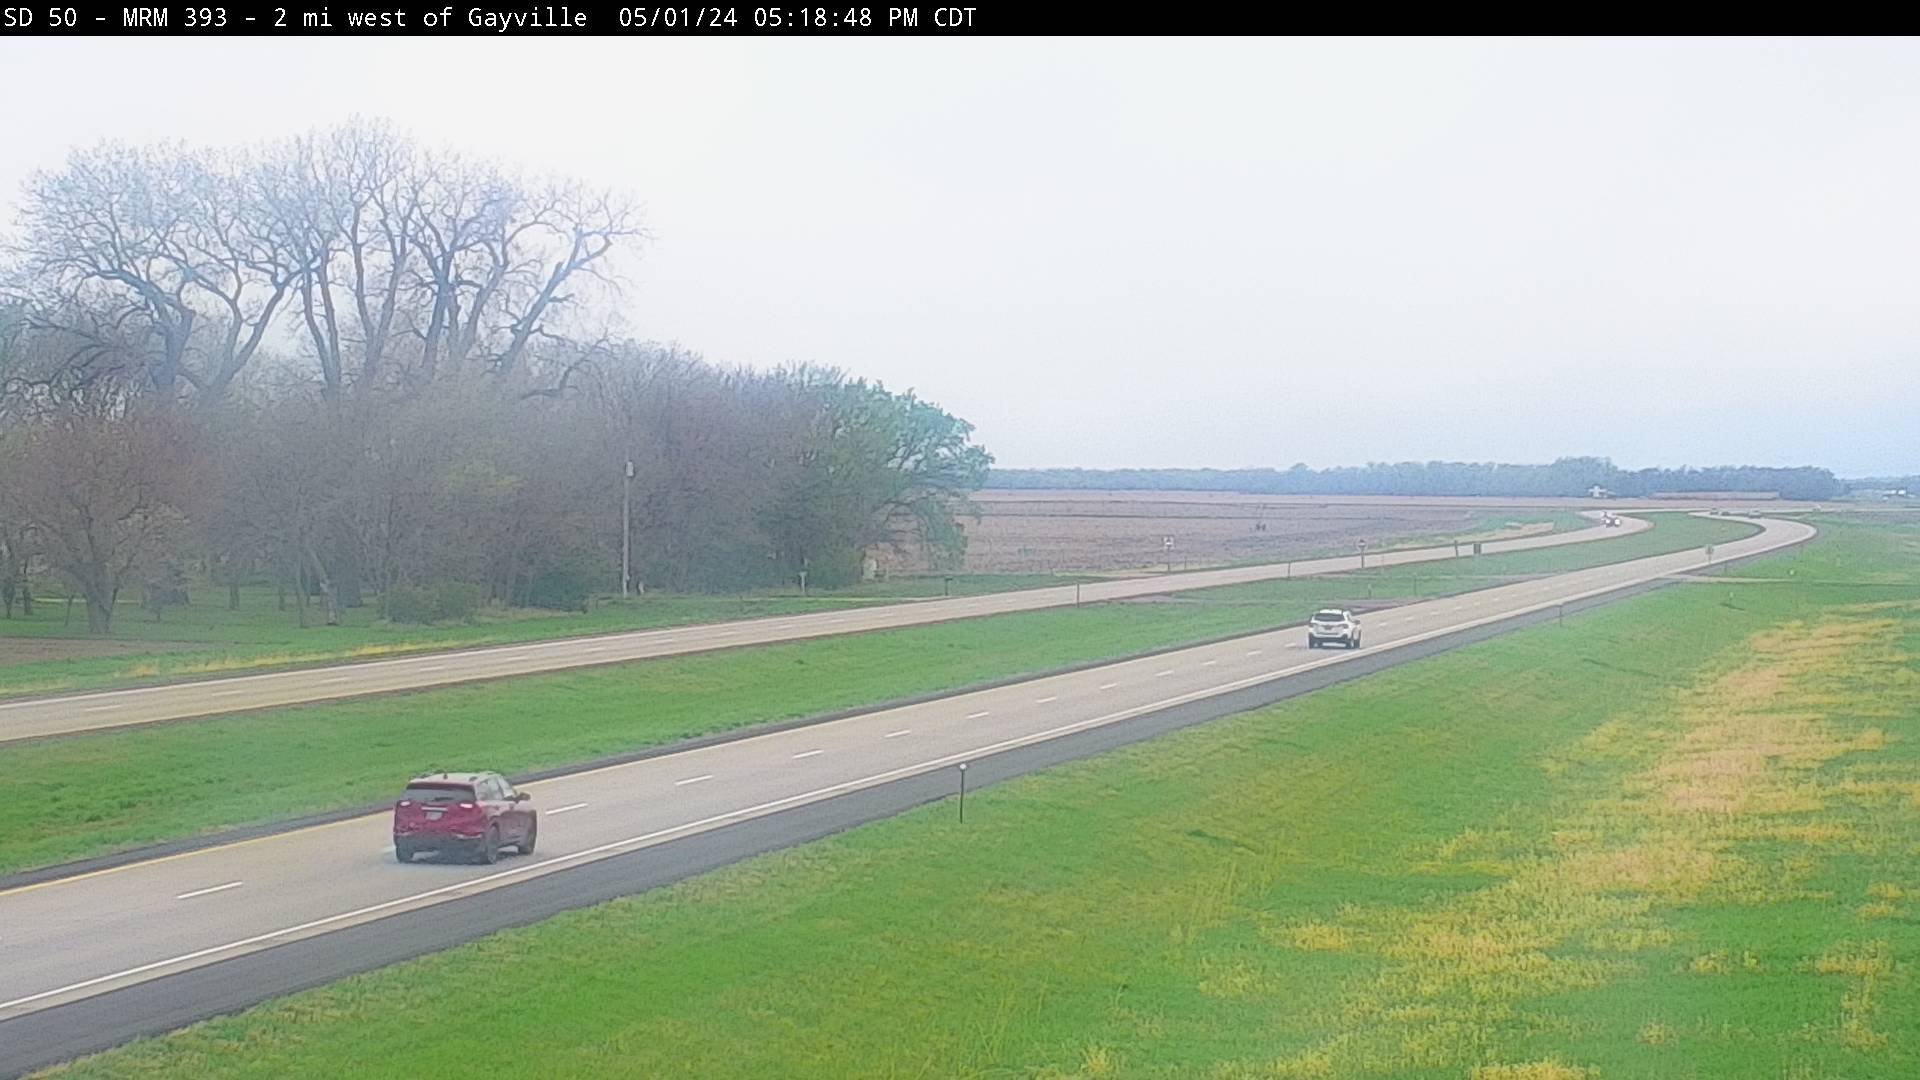 2 miles west of town along SD-50 @ MP 393 - West Traffic Camera